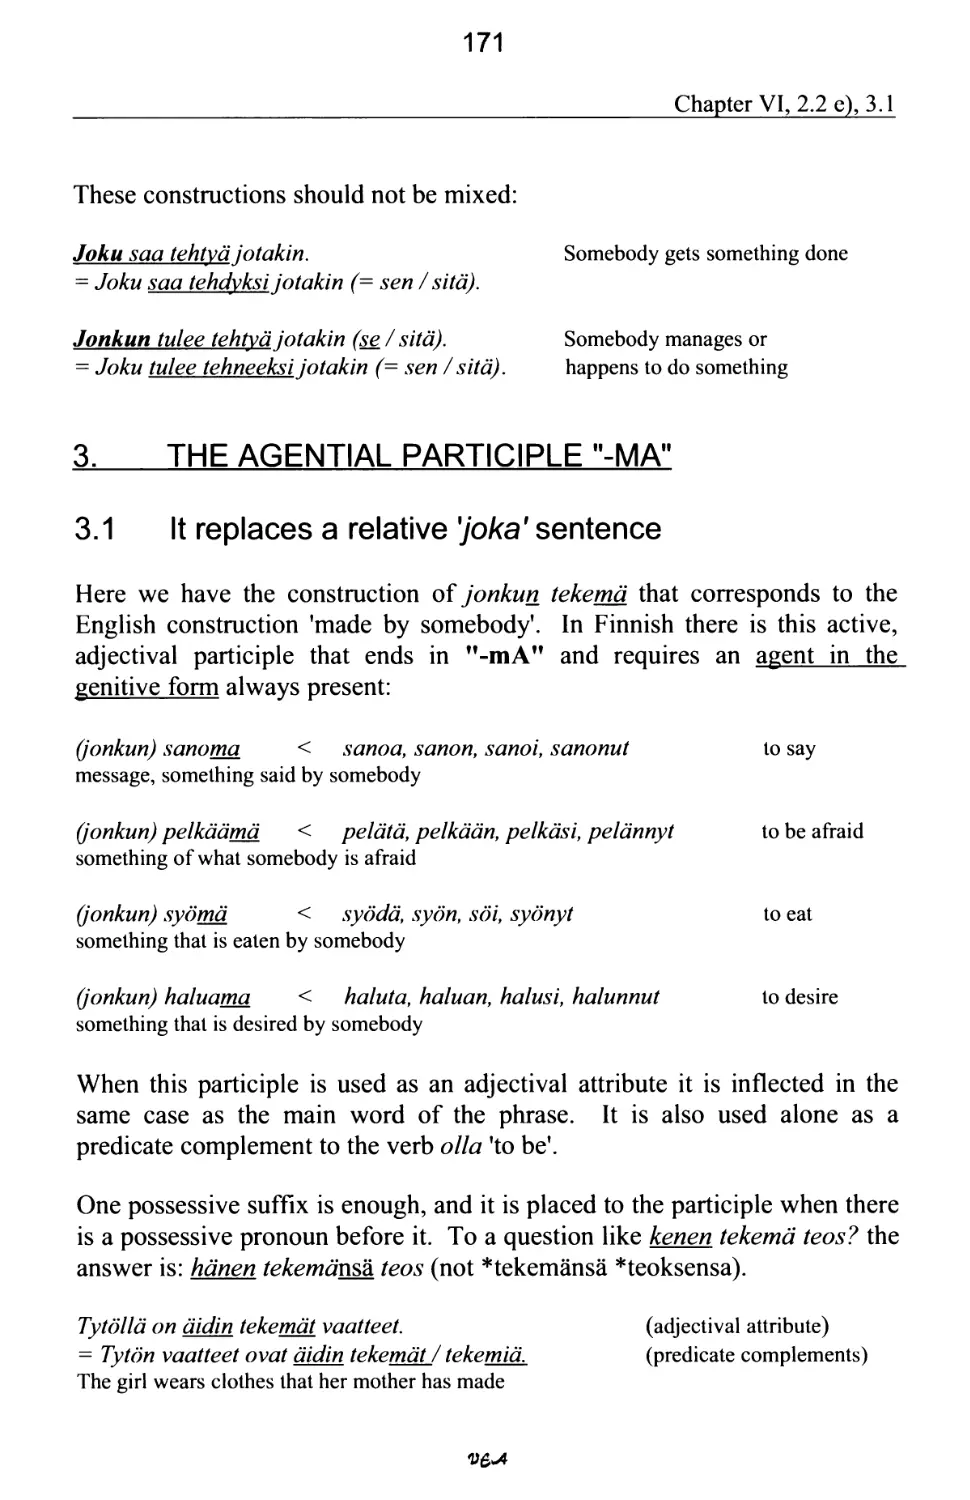 3. THE AGENTIAL PARTICIPLE \